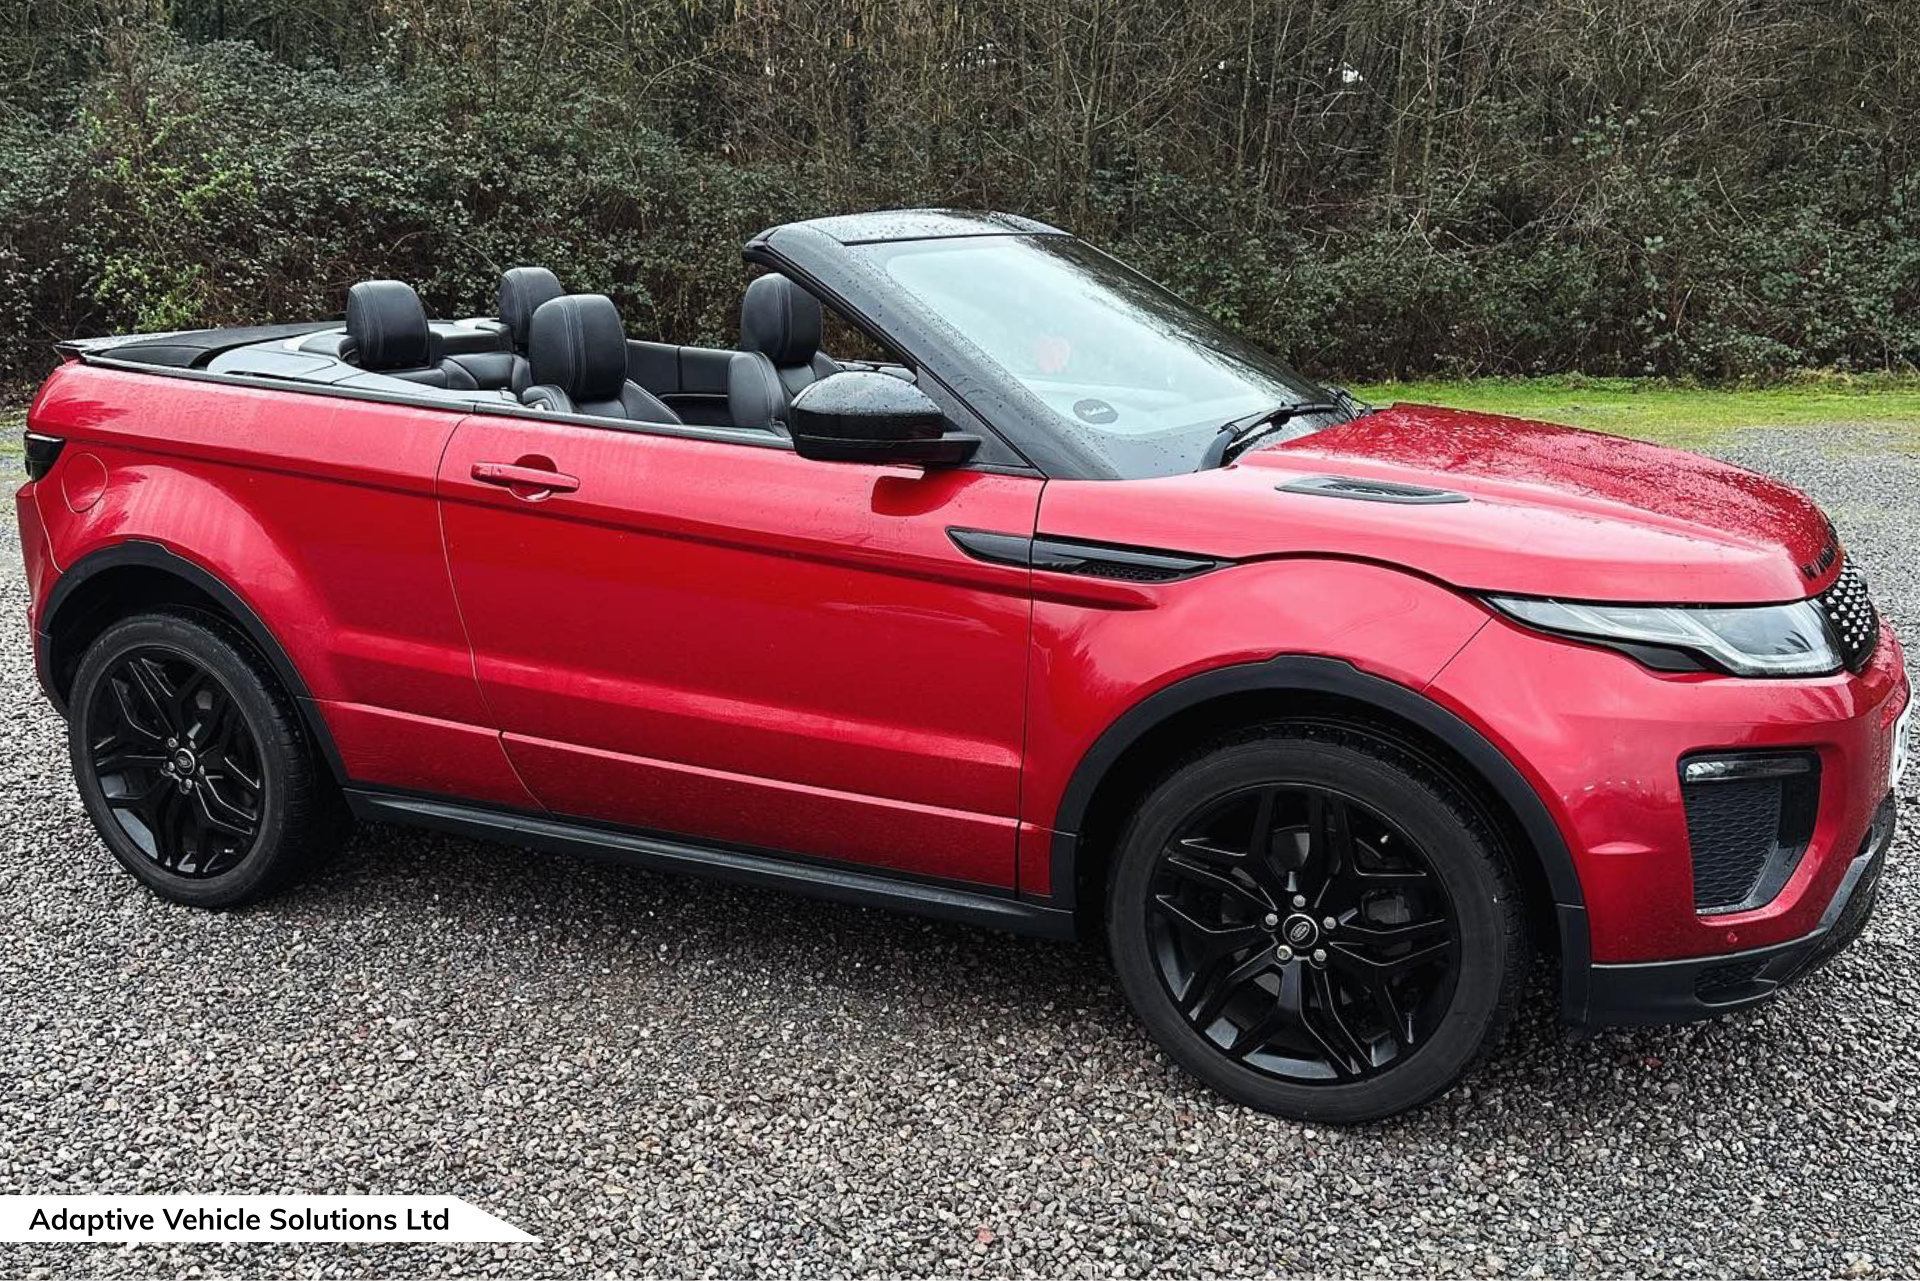 2017 Range Rover Evoque Convertible off side front roof down